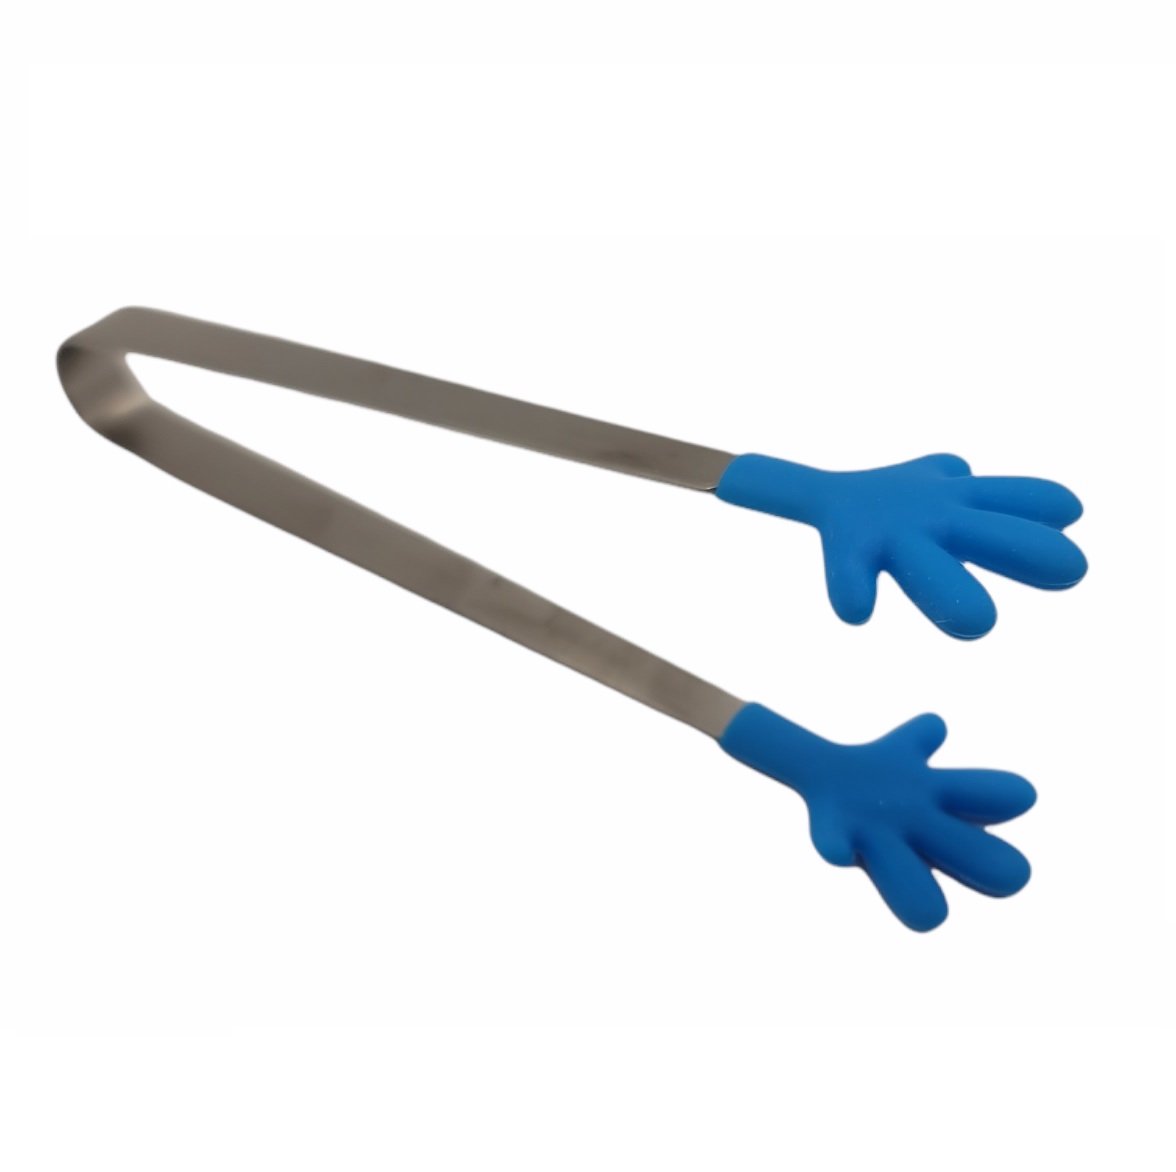 Handy Housewares 5 Long Stainless Steel Mini Tongs with Silicone Hand